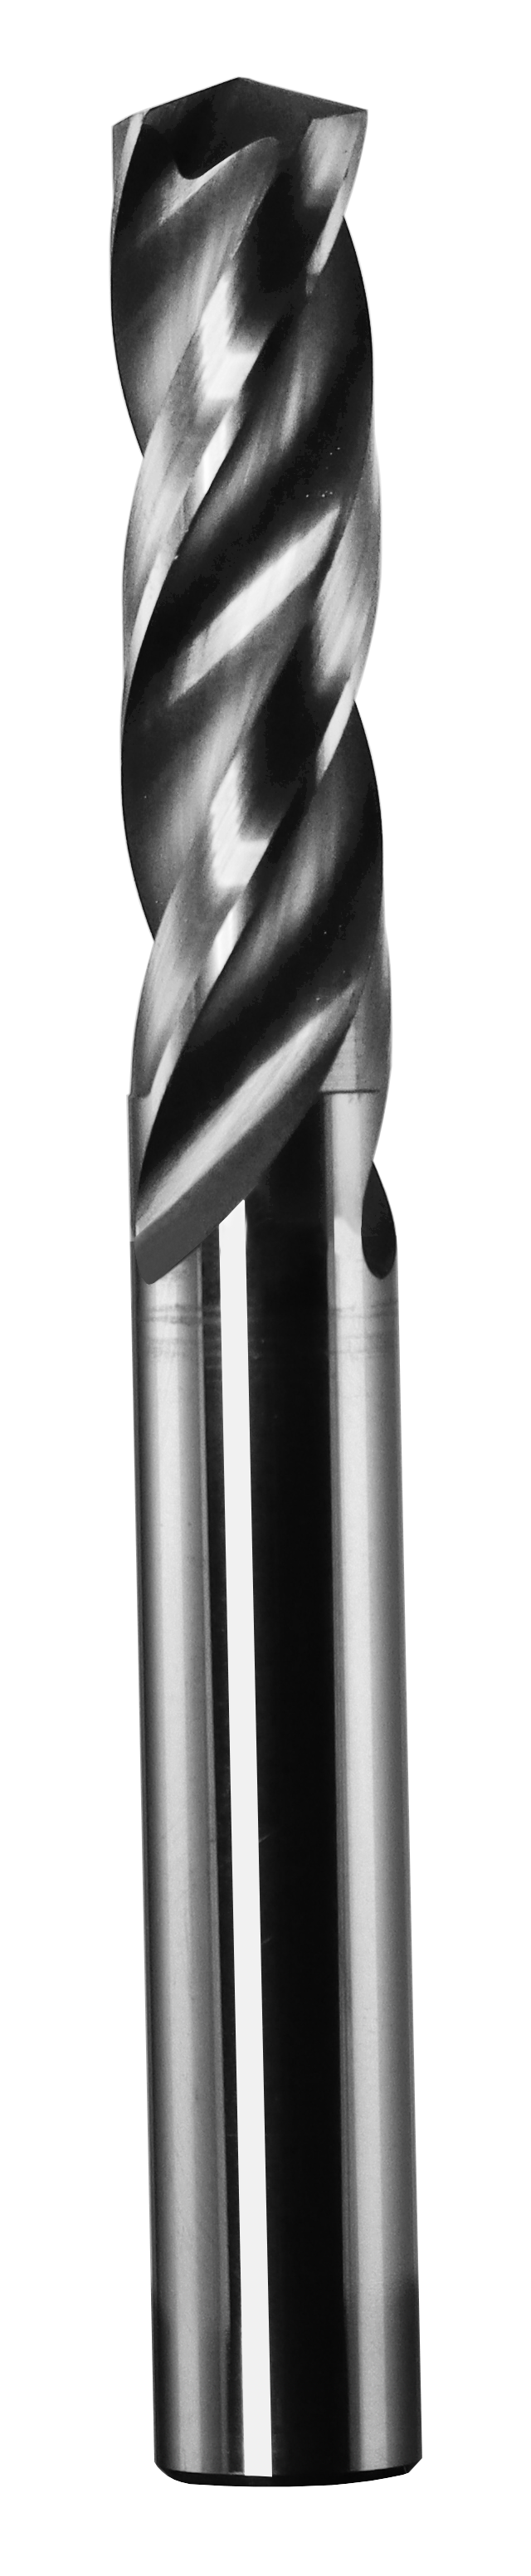 3.60mm Dia, 150 Degree Point, Solid Carbide Drill - 63047